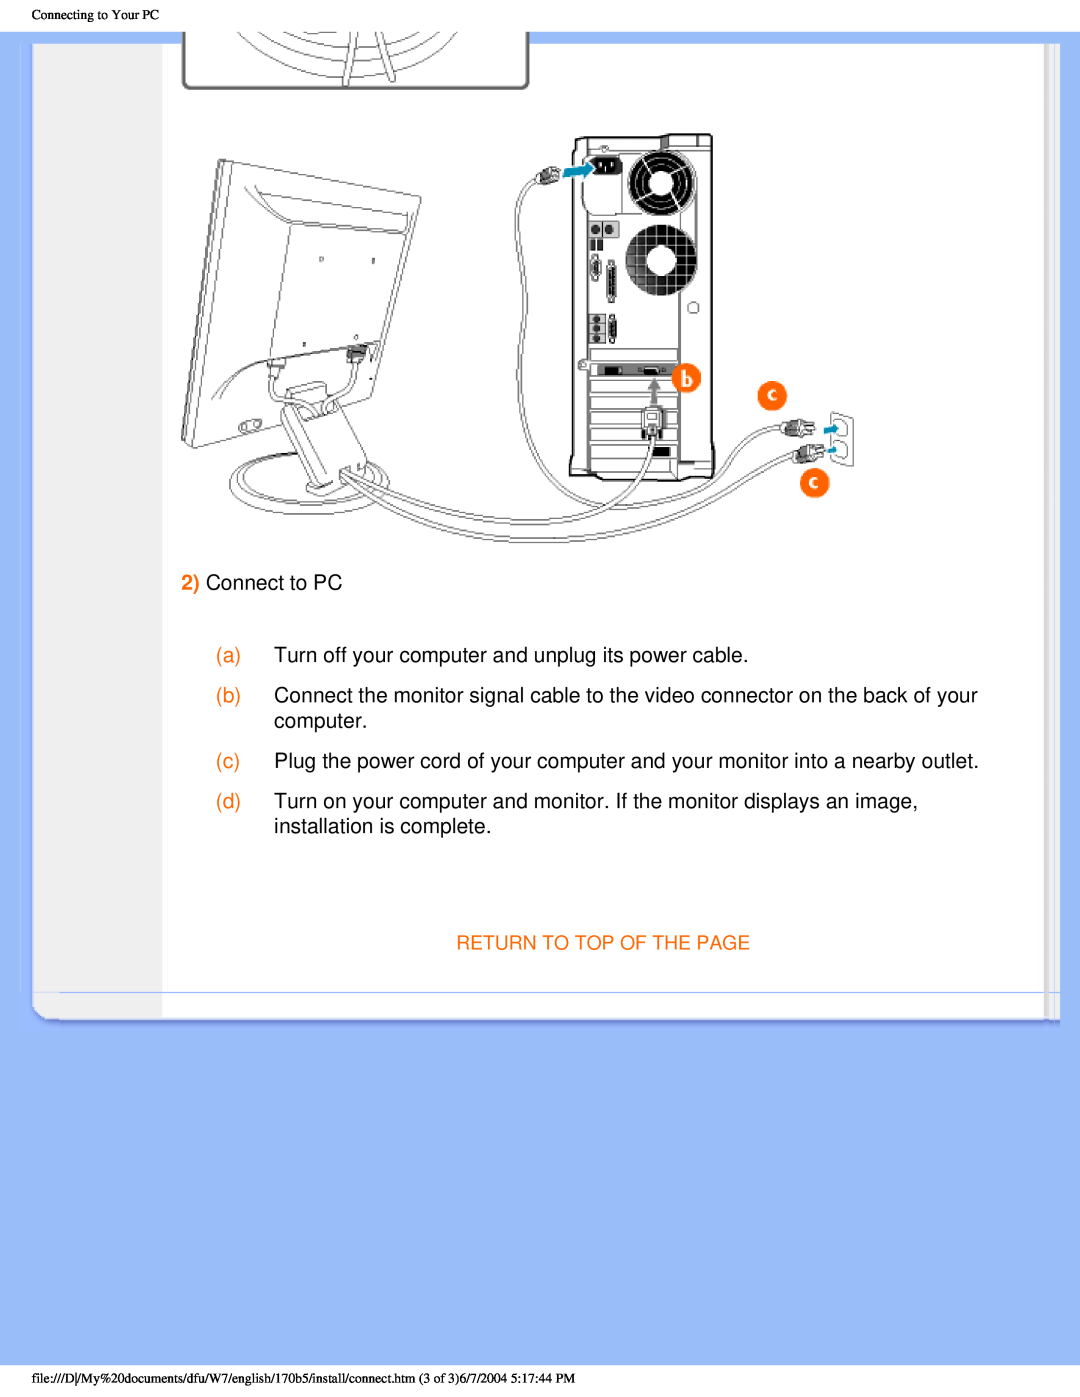 Philips 170B5 user manual 2Connect to PC 